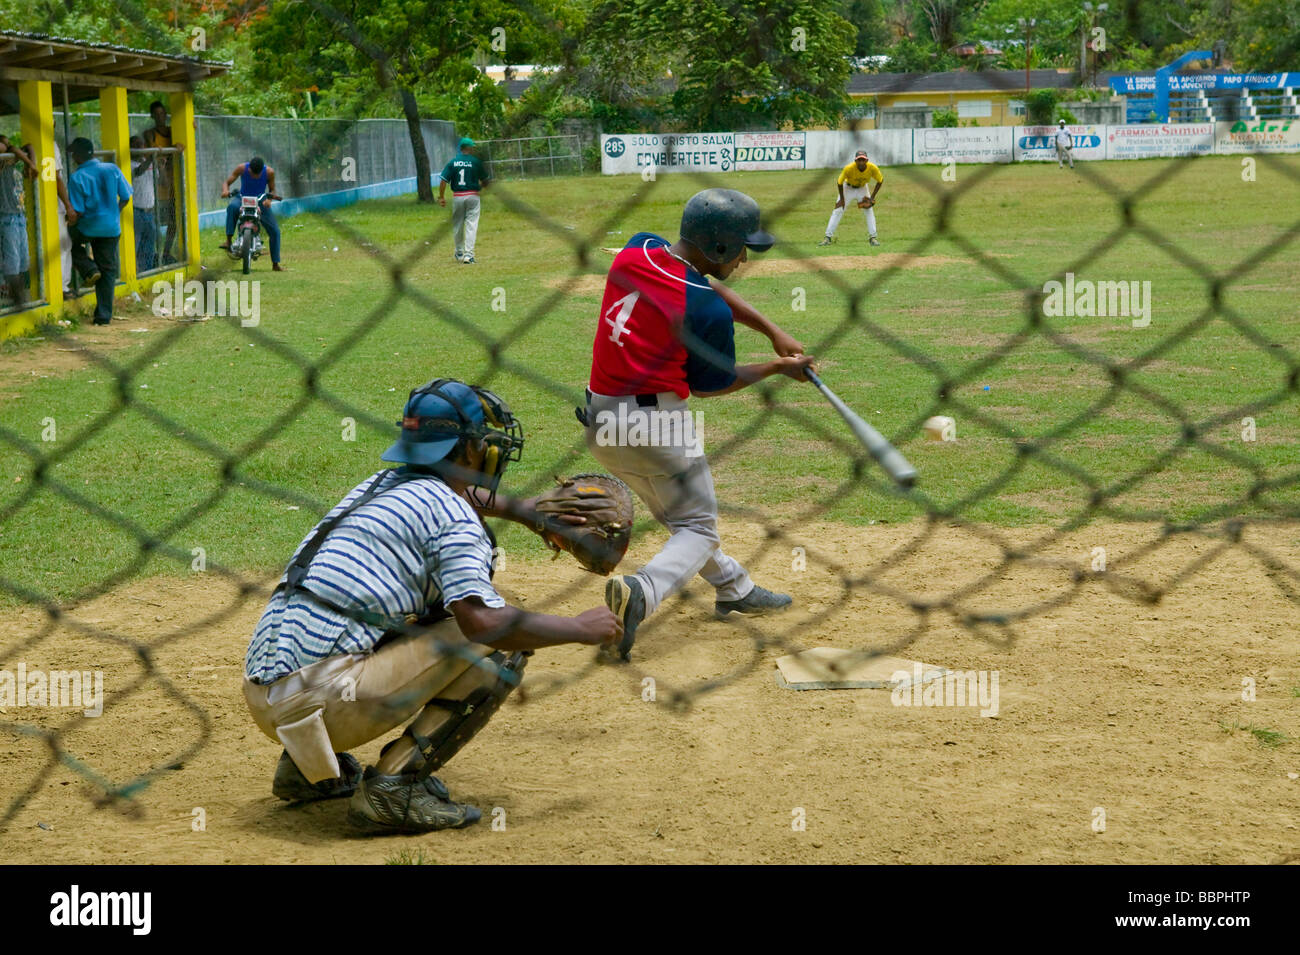 Dominican Republic,West Indies,Caribbean;Baseball game Stock Photo